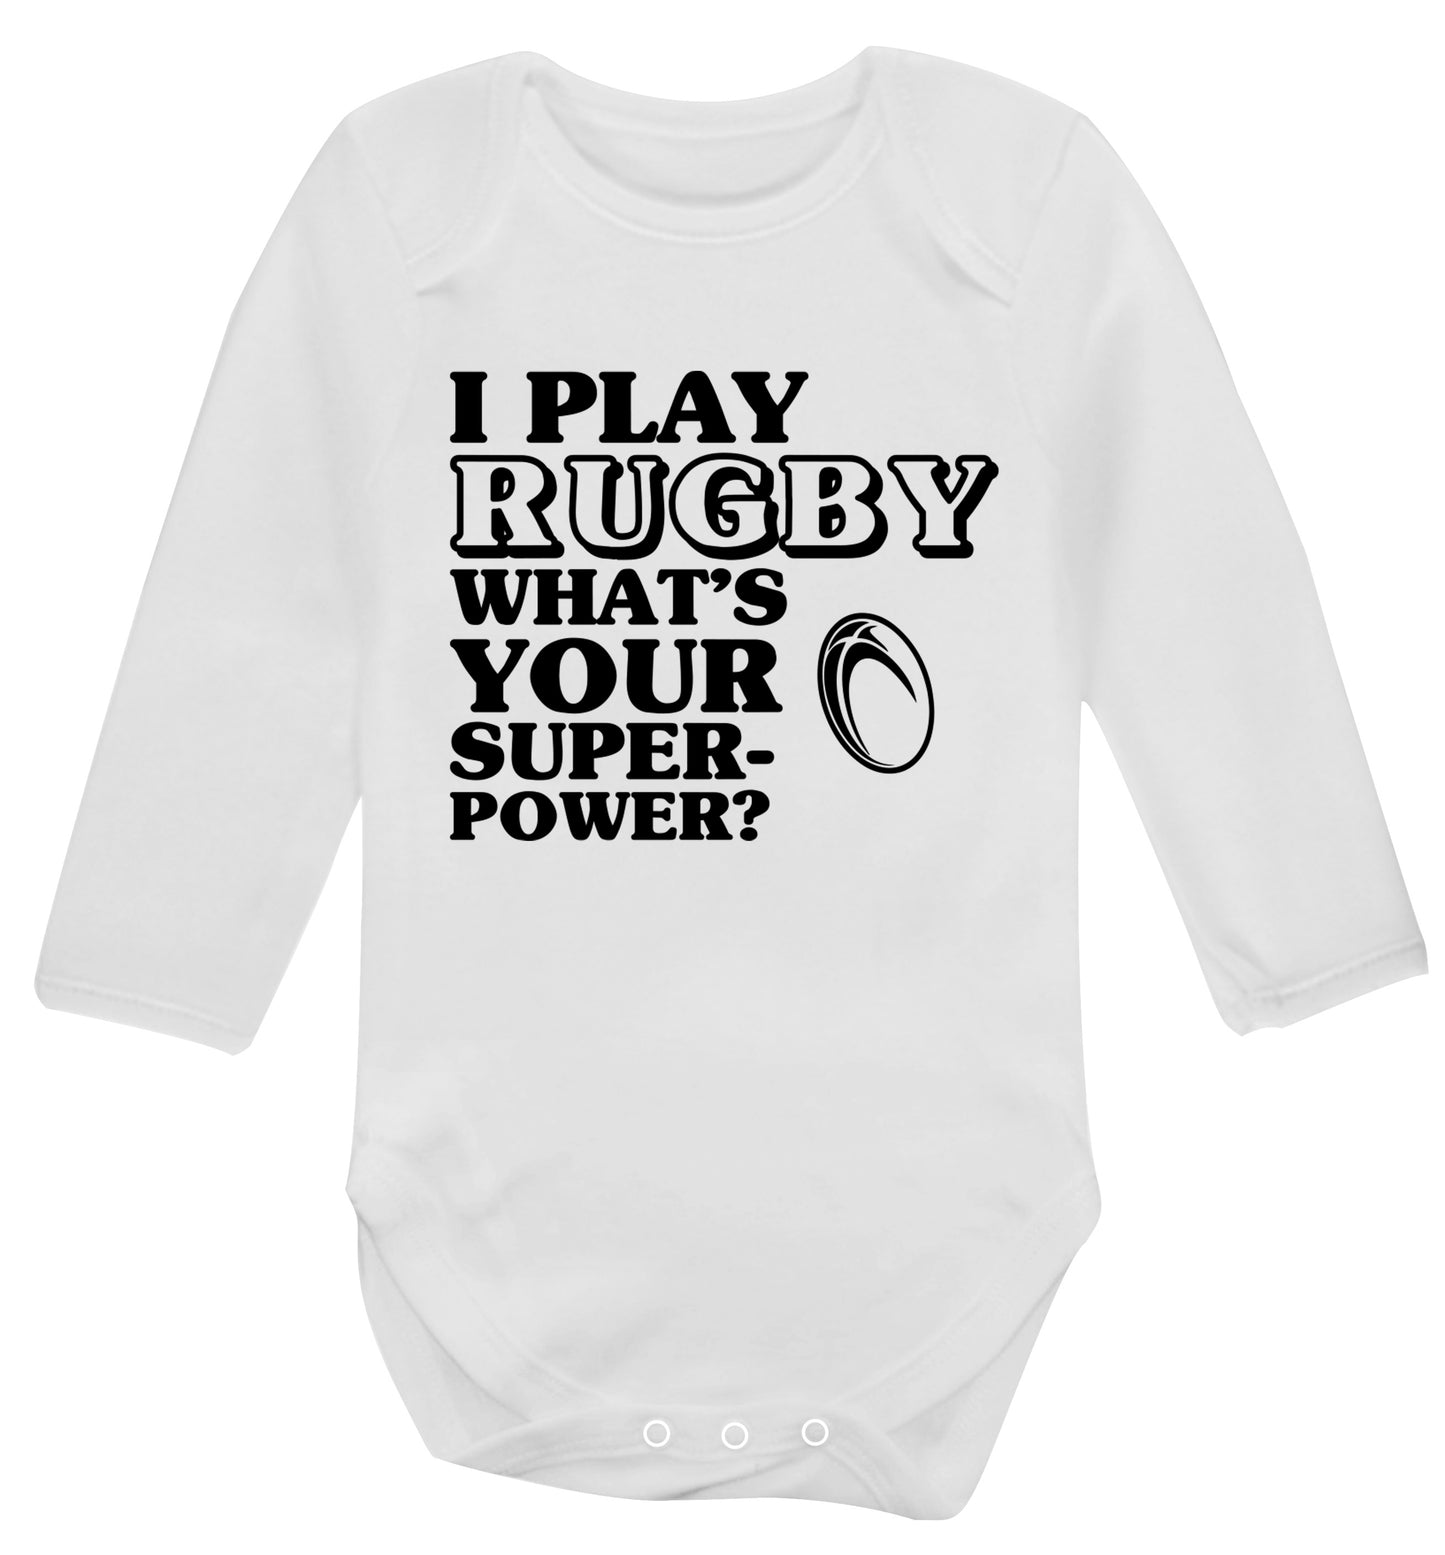 I play rugby what's your superpower? Baby Vest long sleeved white 6-12 months